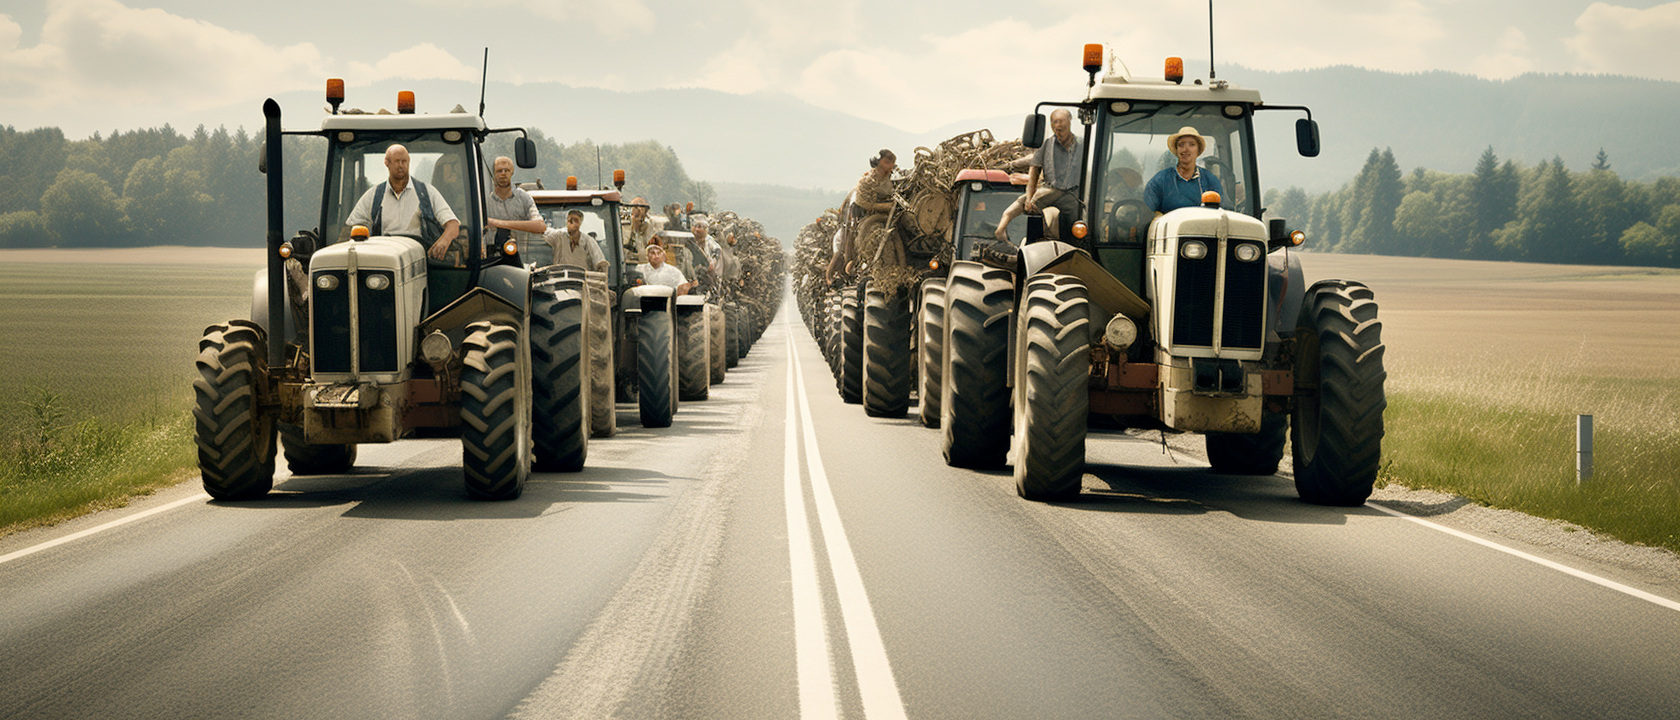 The German Farmer Revolt: A Countrywide Pushback Against Government Regulations